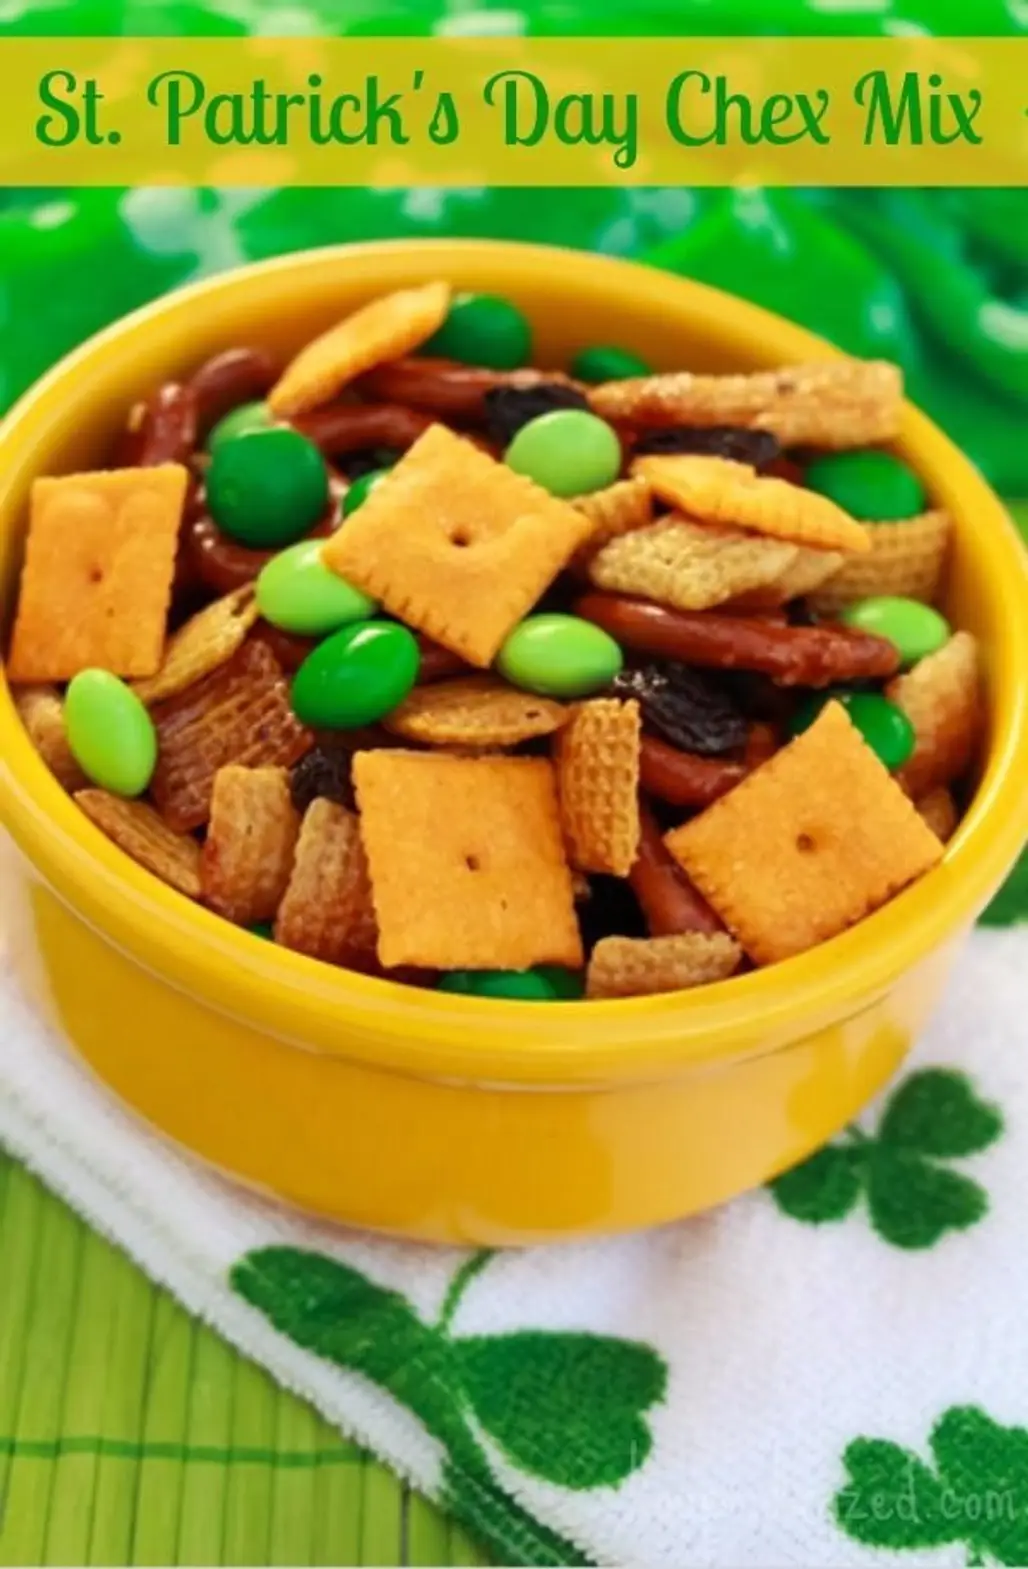 Super Easy St. Patrick’s Day Chex Mix